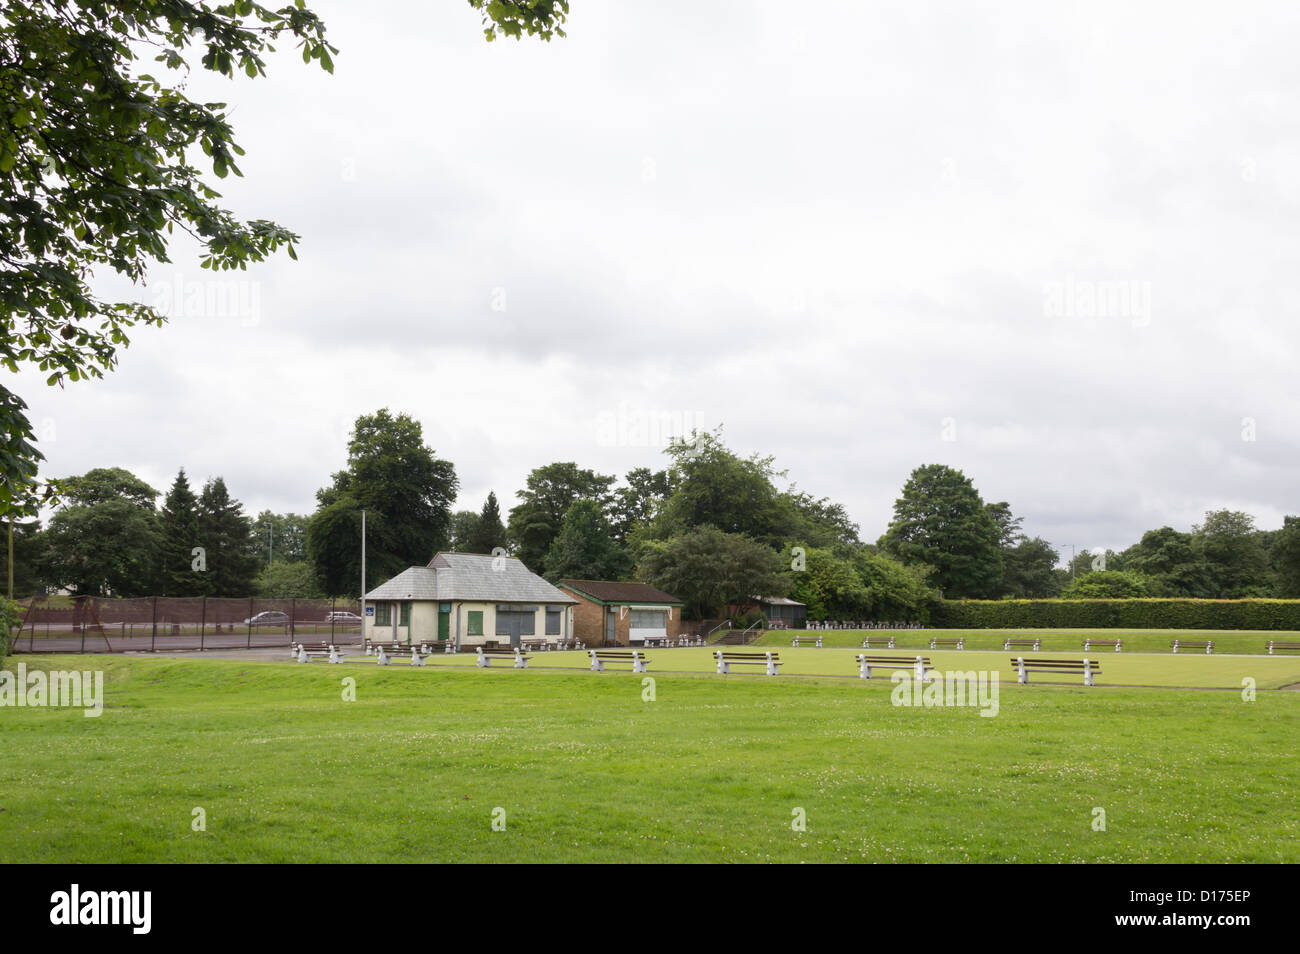 Pavilion and crown bowling green surrounded by bench seats at Moss Bank Park Bolton with tennis courts and Moss Bank Way behind. Stock Photo